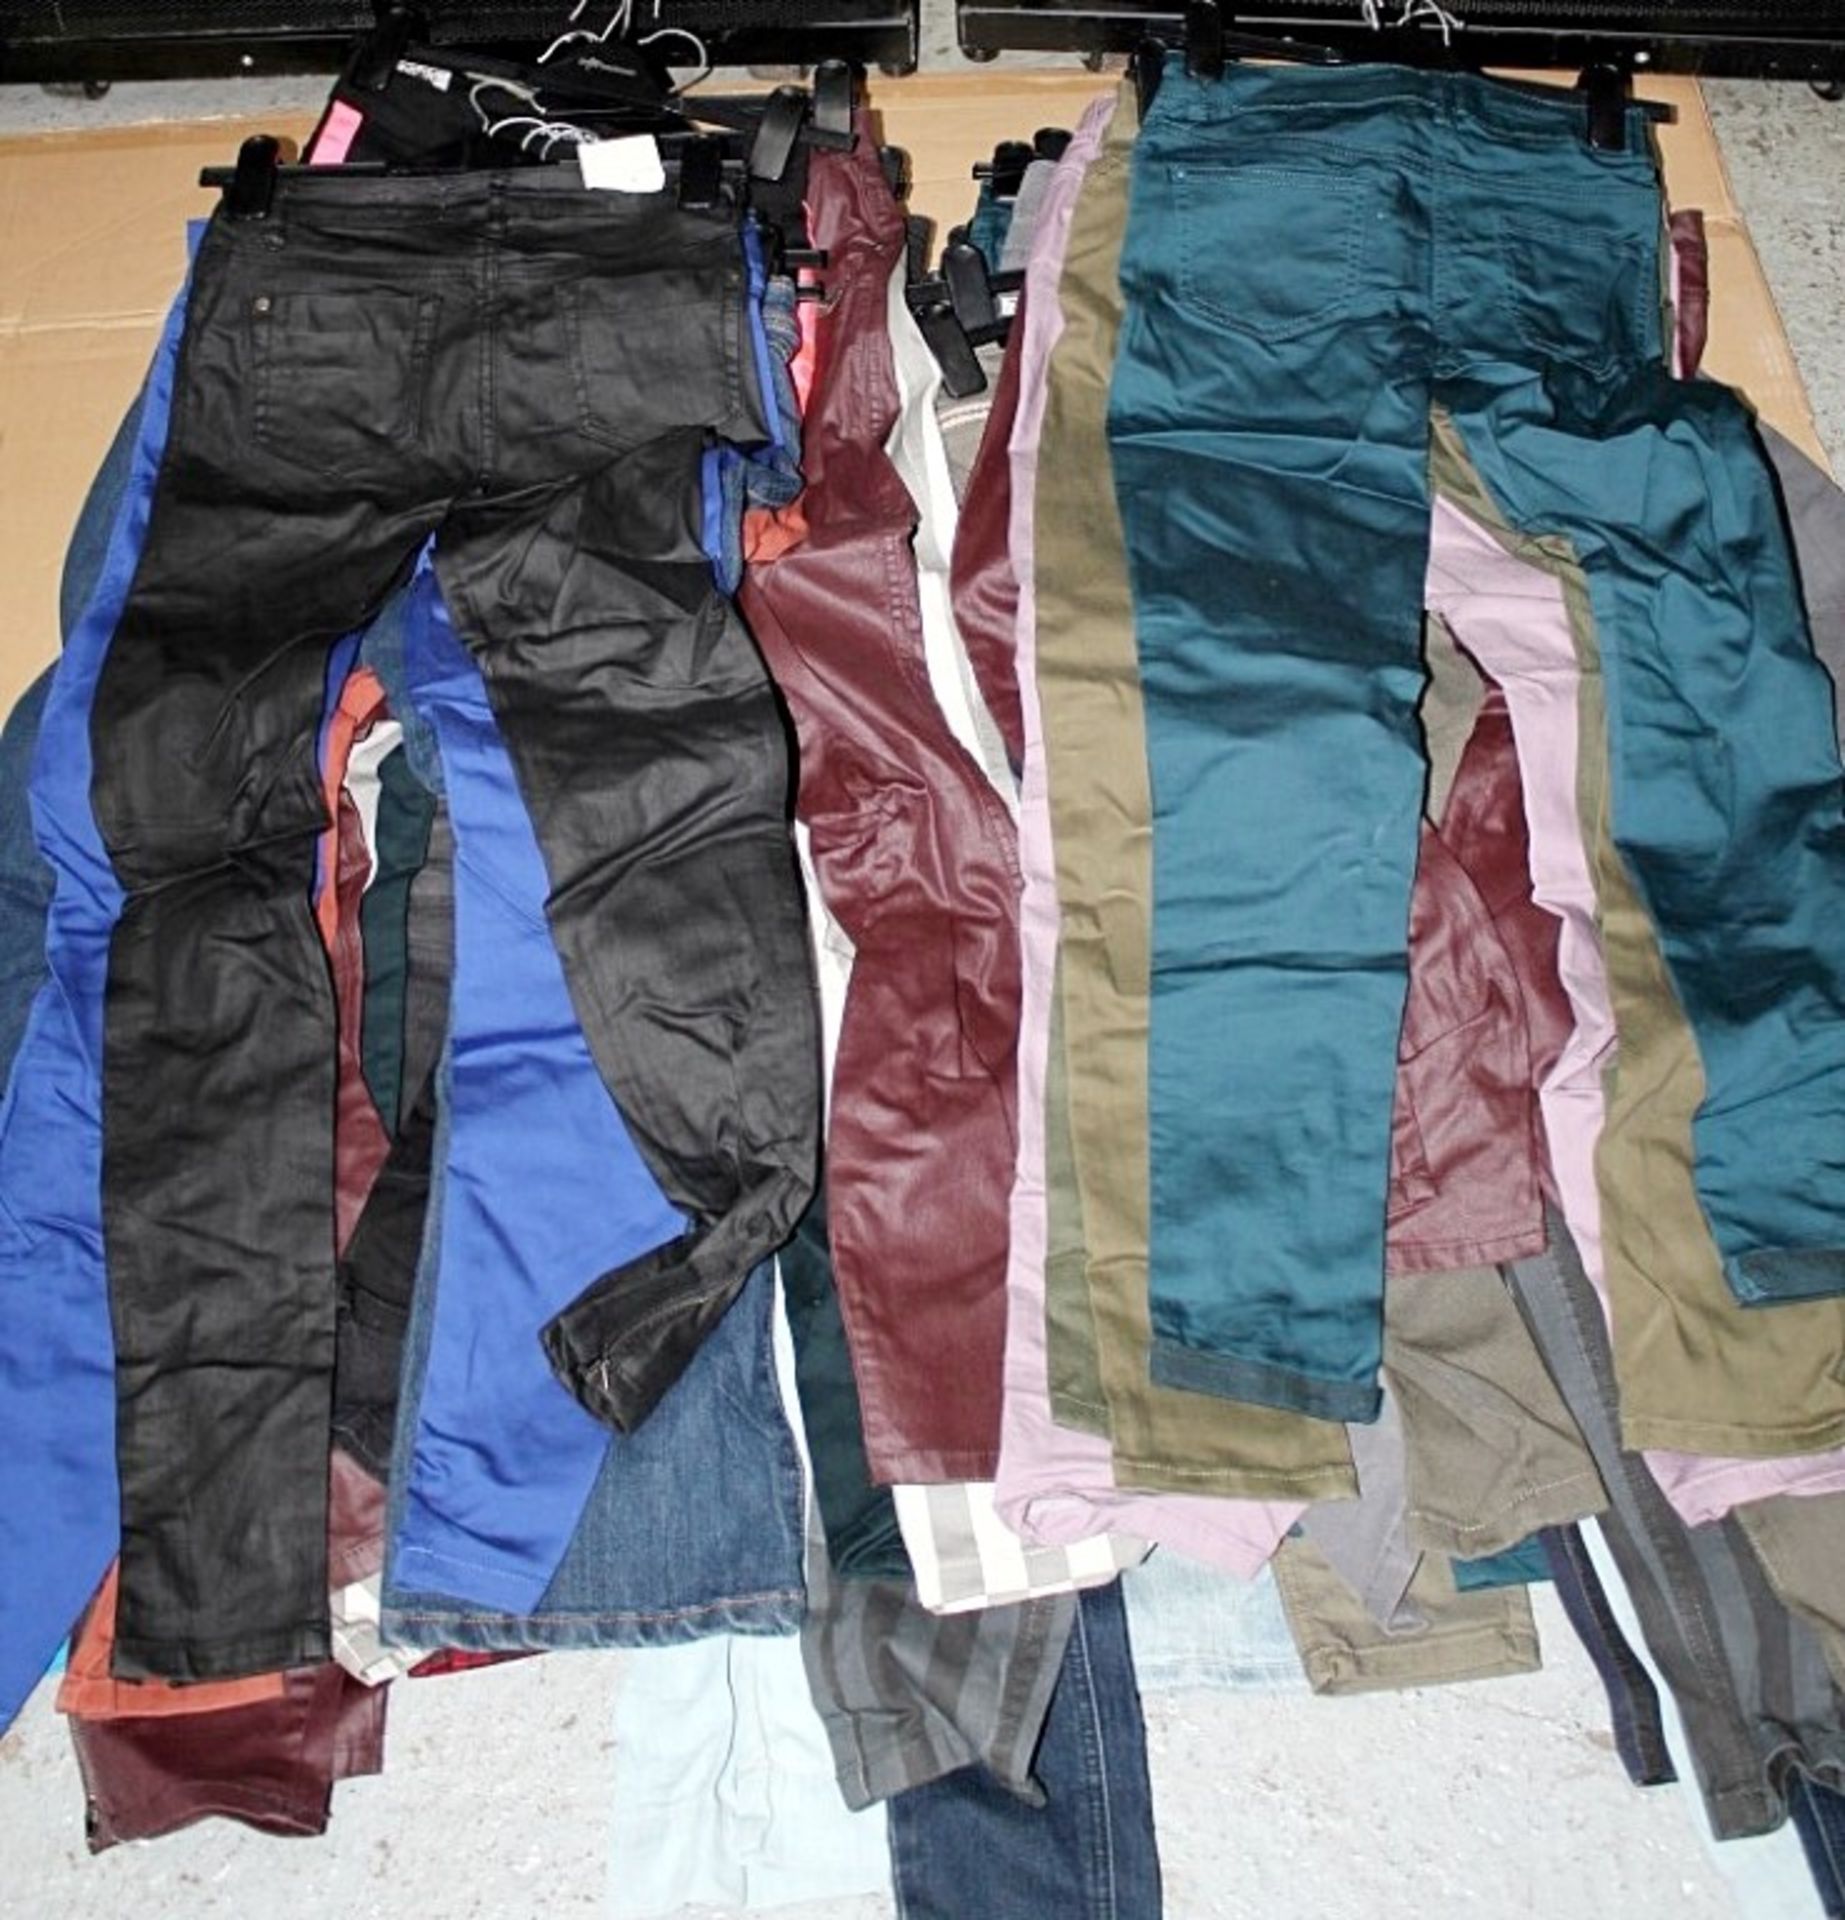 45 x Items Of Assorted Pairs Of Ladies Jeans – Box2620 – New With Tags - Various Sizes Ranging